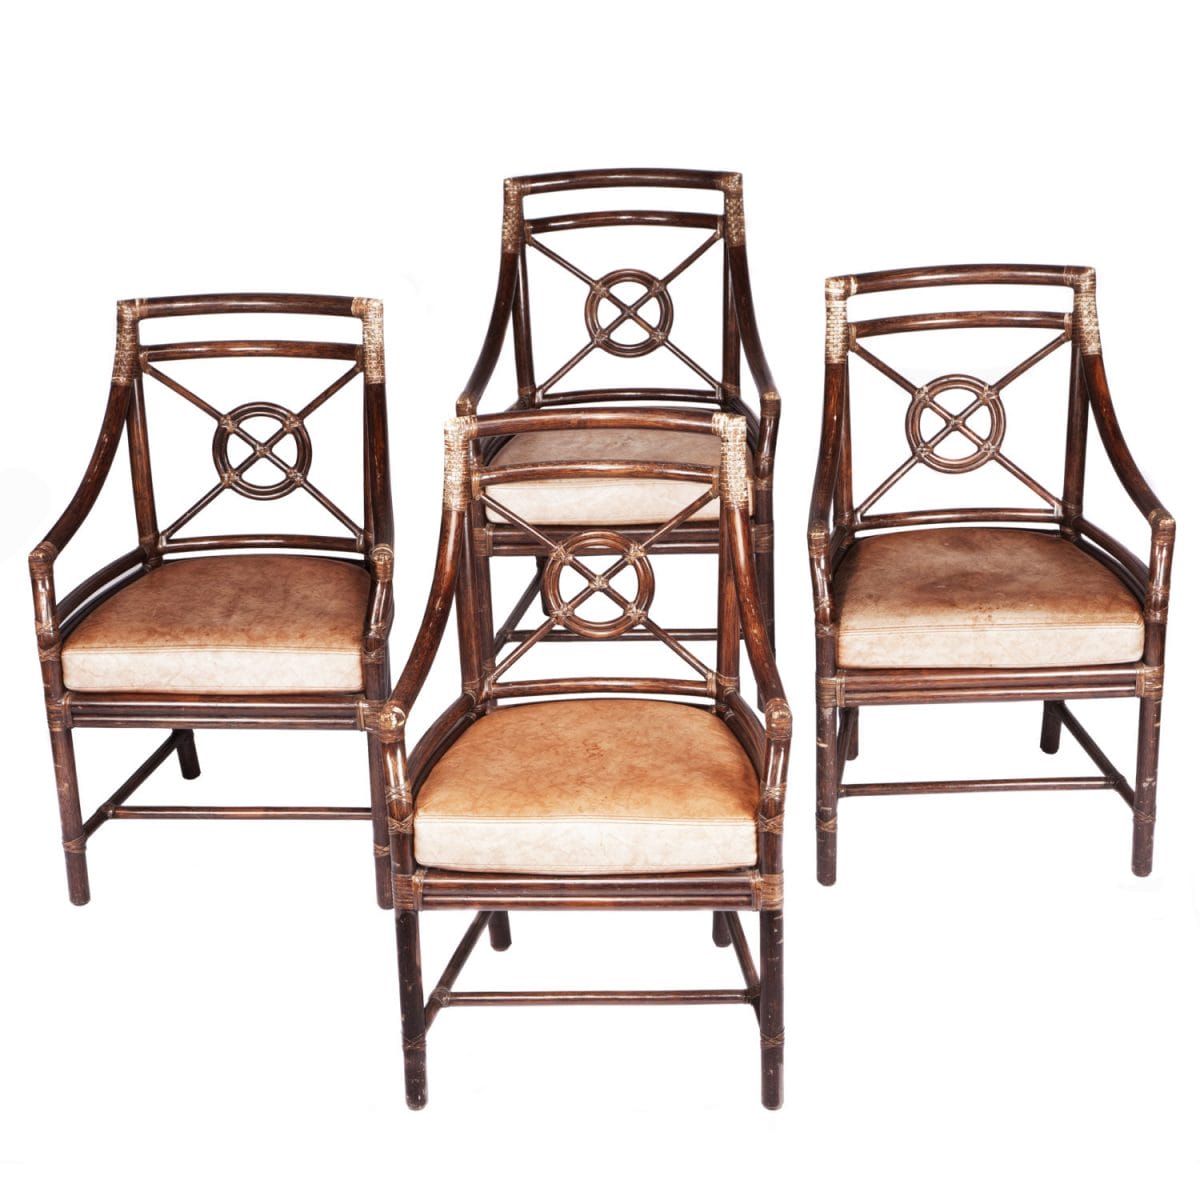 <p><a href="https://finesf.com/lot/set-of-four-mcguire-armchairs-4019115">Set of Four McGuire Target Chairs Designed by Elinor McGuire (M-59B/SL)</a></p>